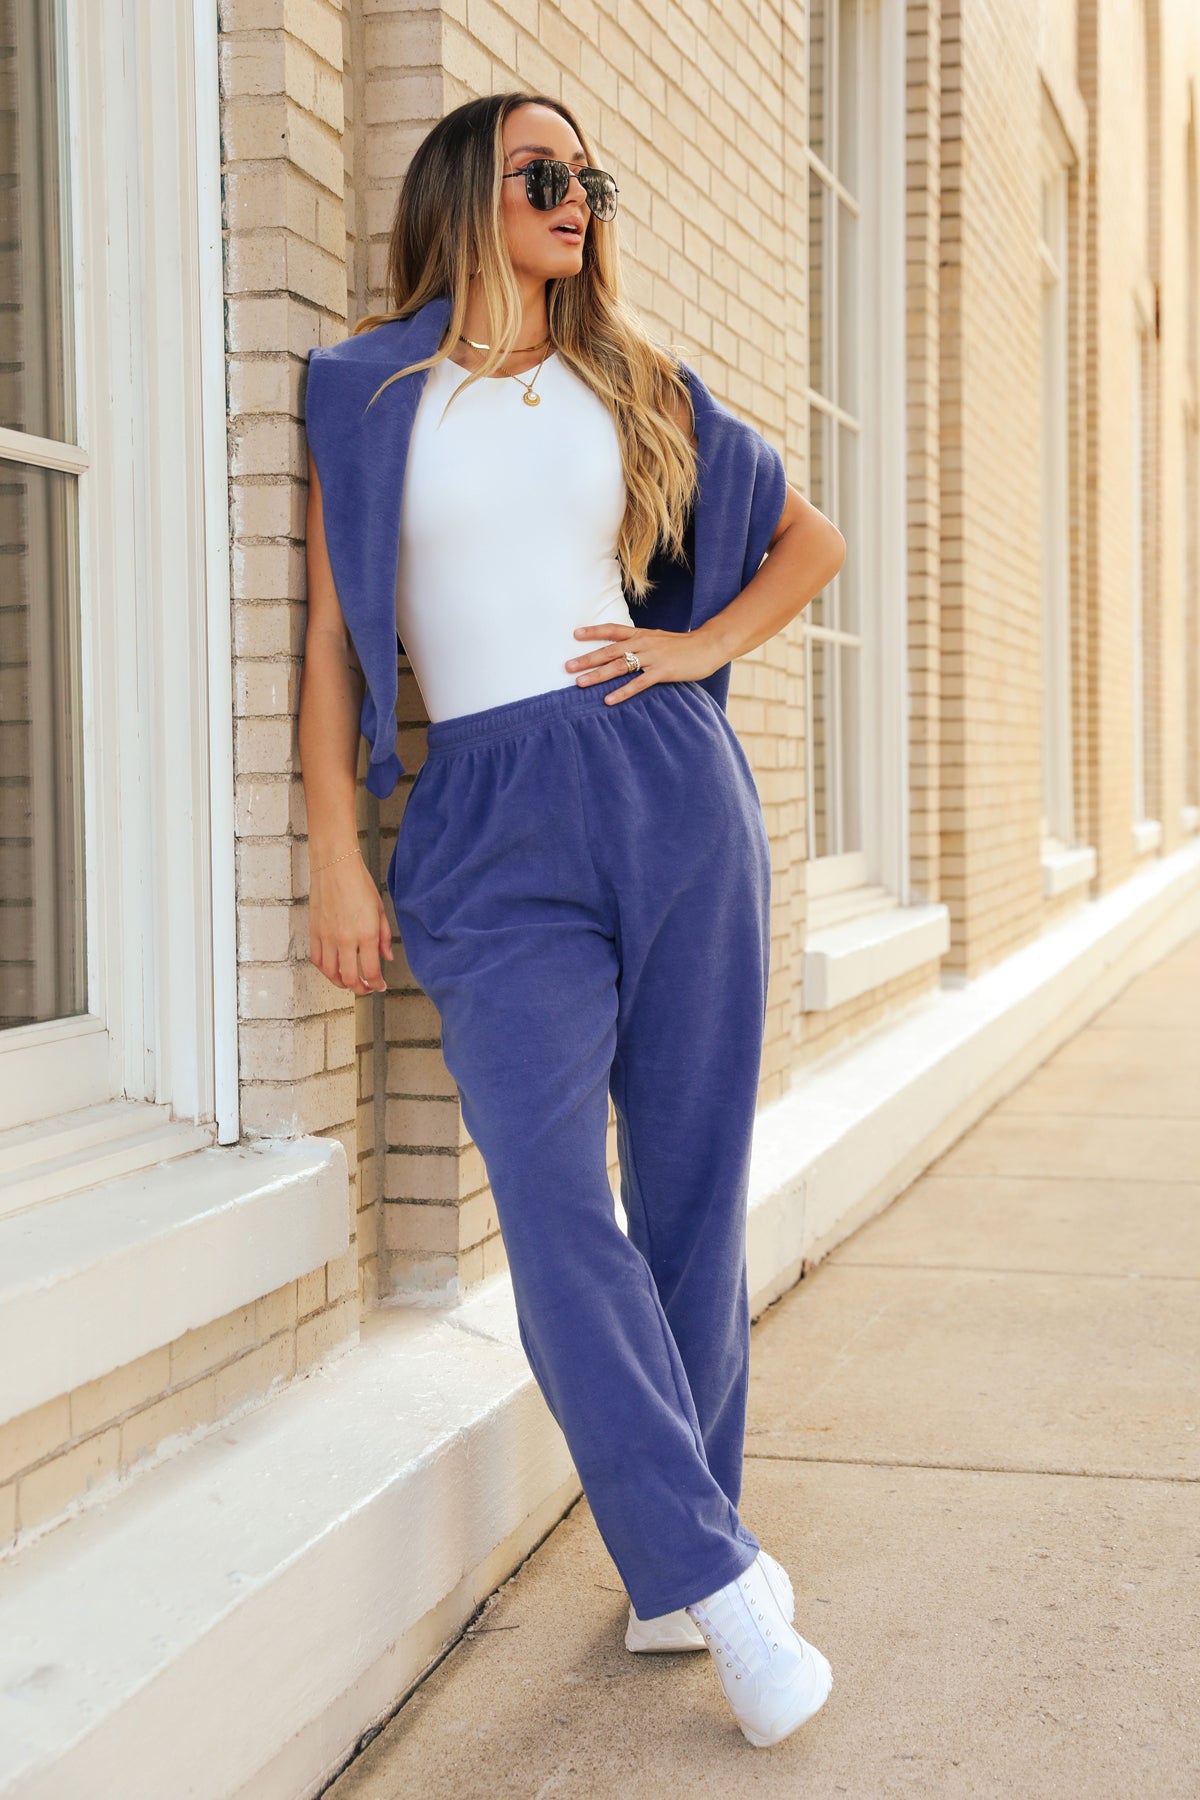 Model wearing the Go Look For Less Sweatpants